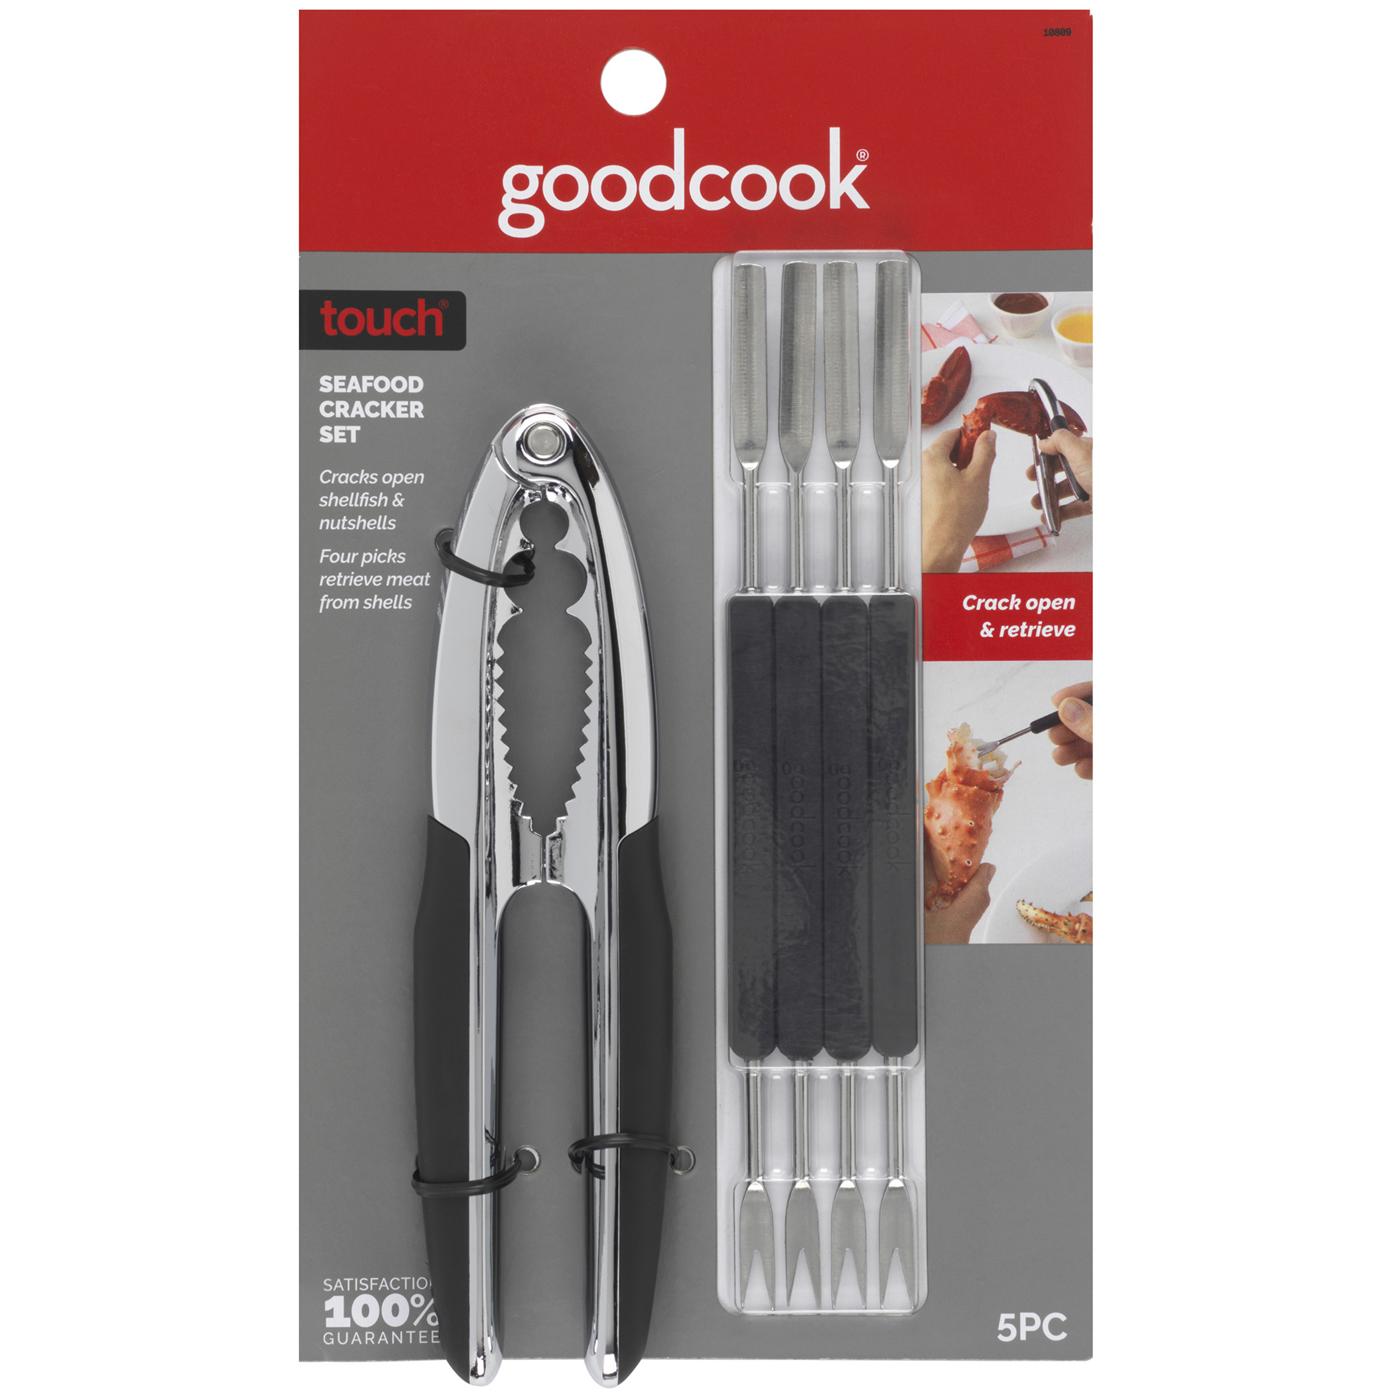 GoodCook Touch Seafood Cracker Set; image 1 of 3